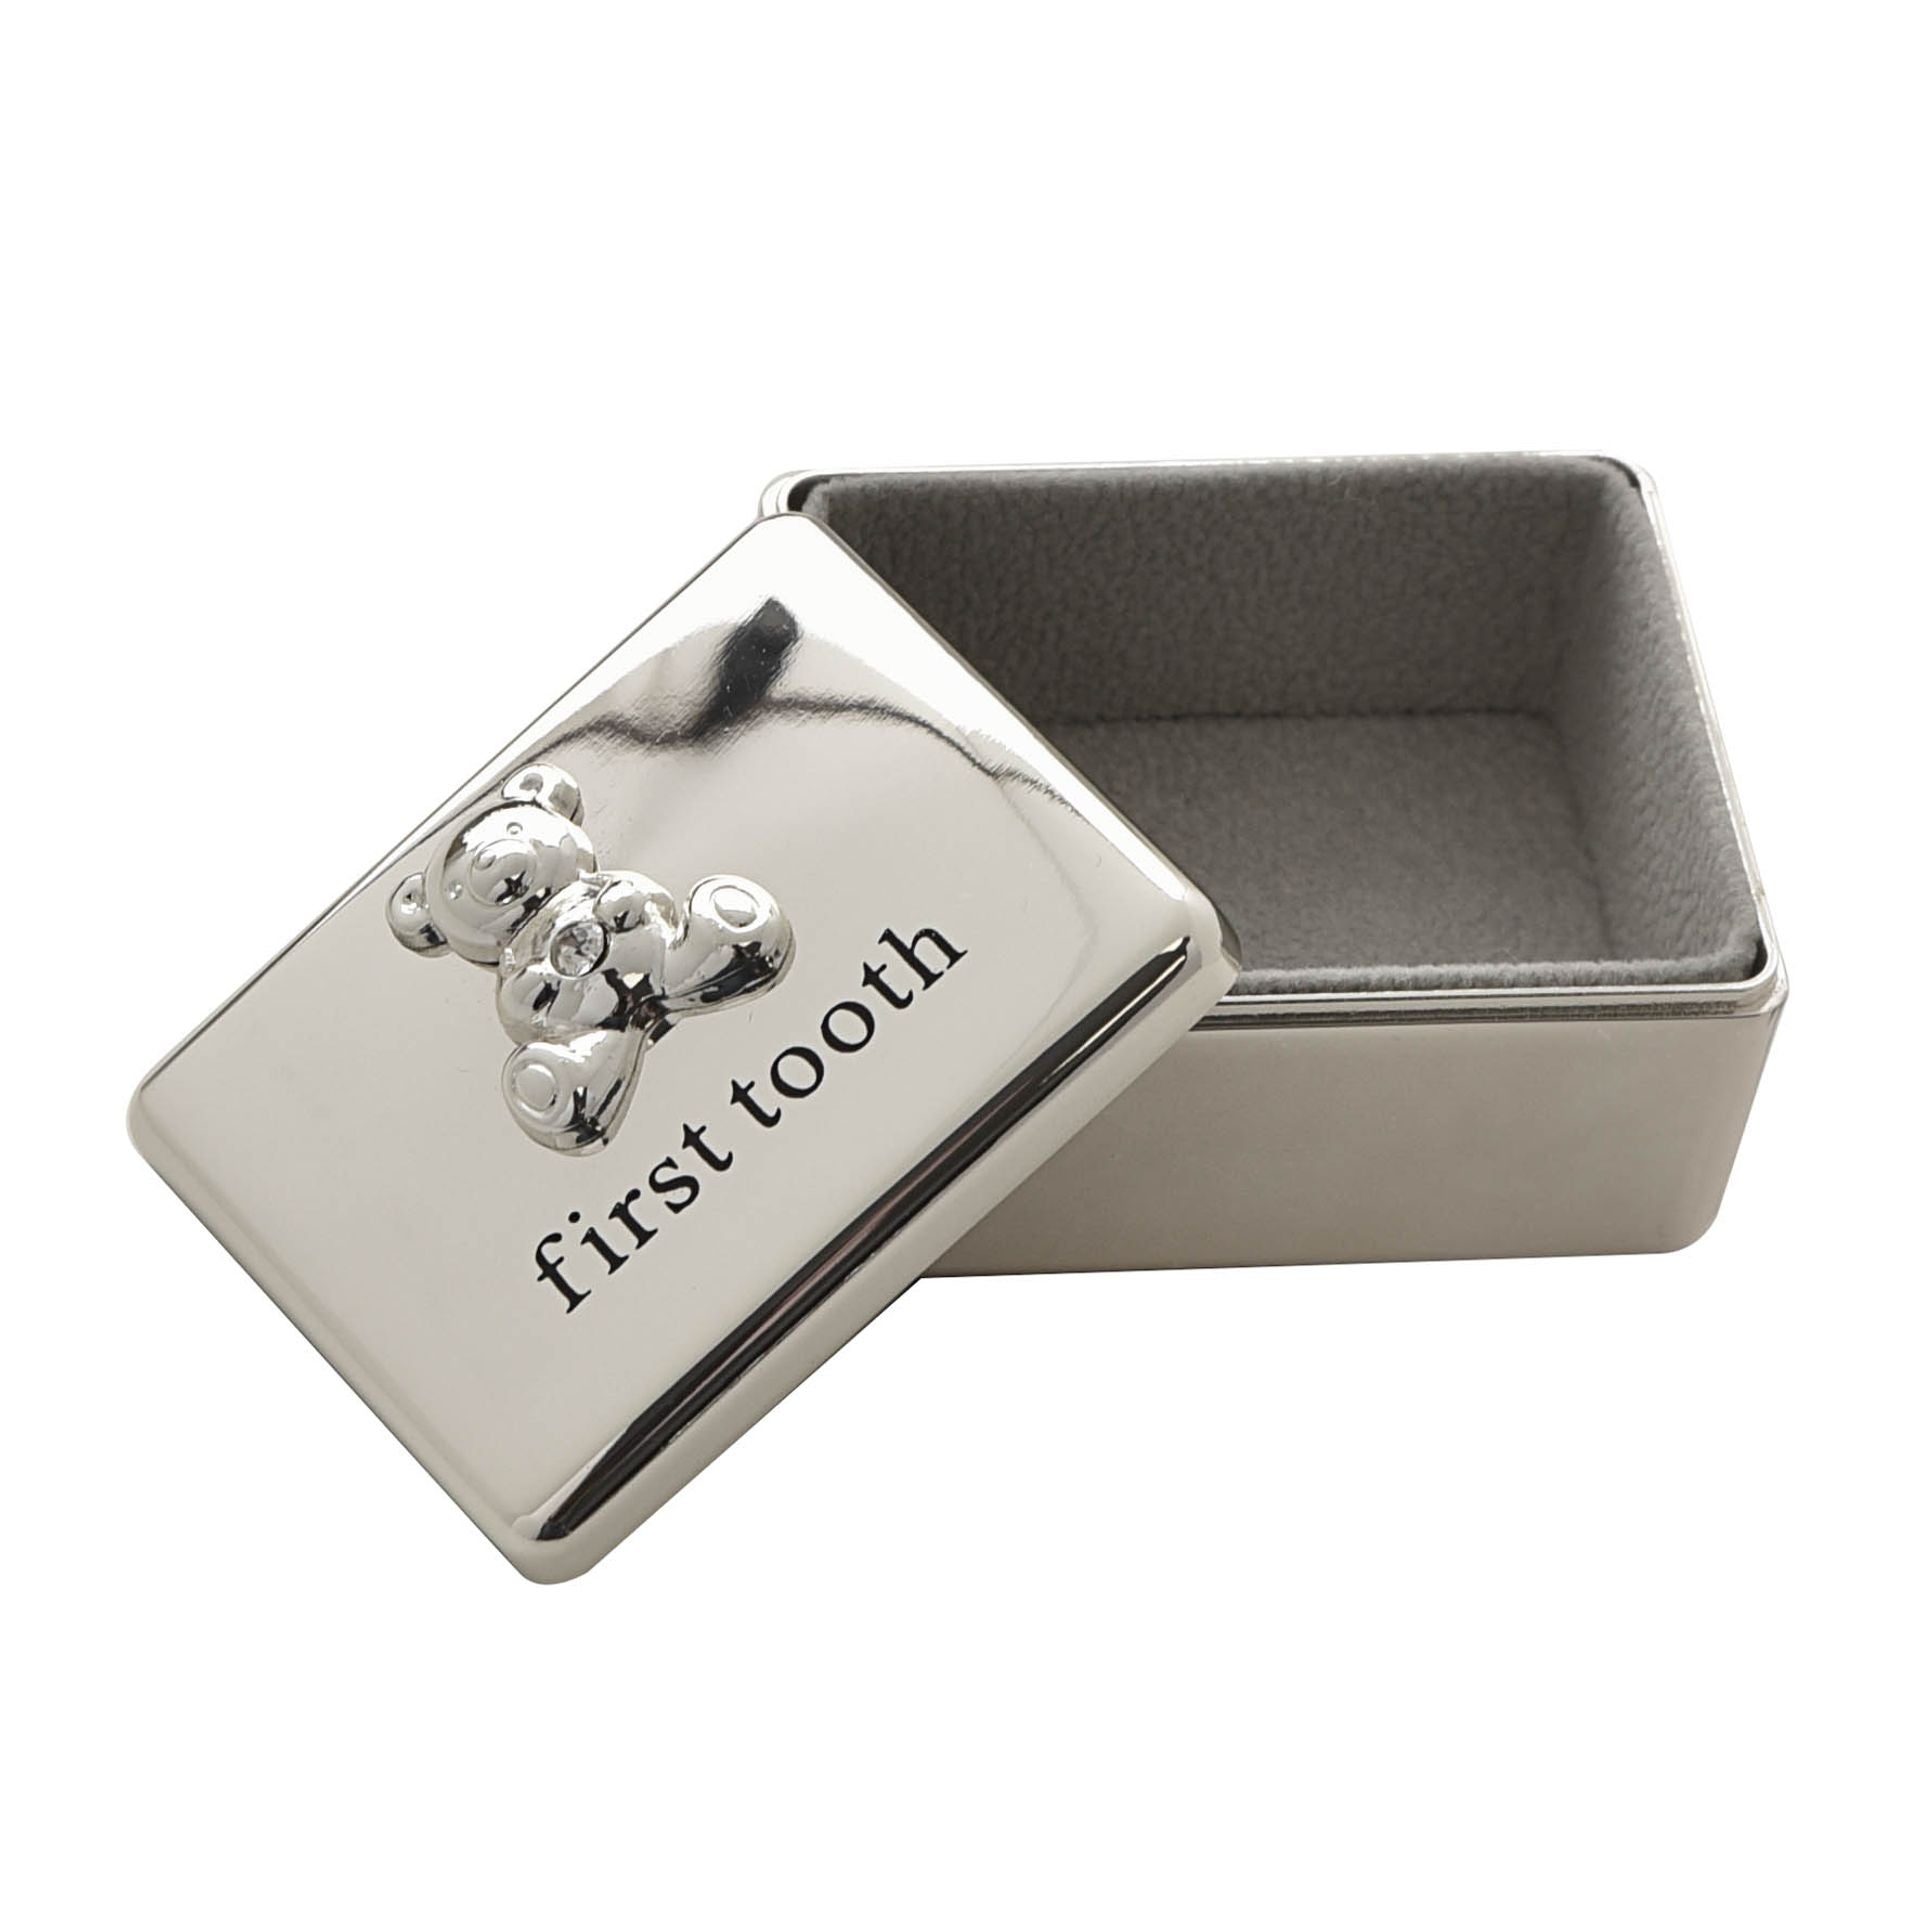 This beautiful design includes a crystal-set teddy bear icon upon the lid, and features a smooth finish with ‘First Tooth’ engraving